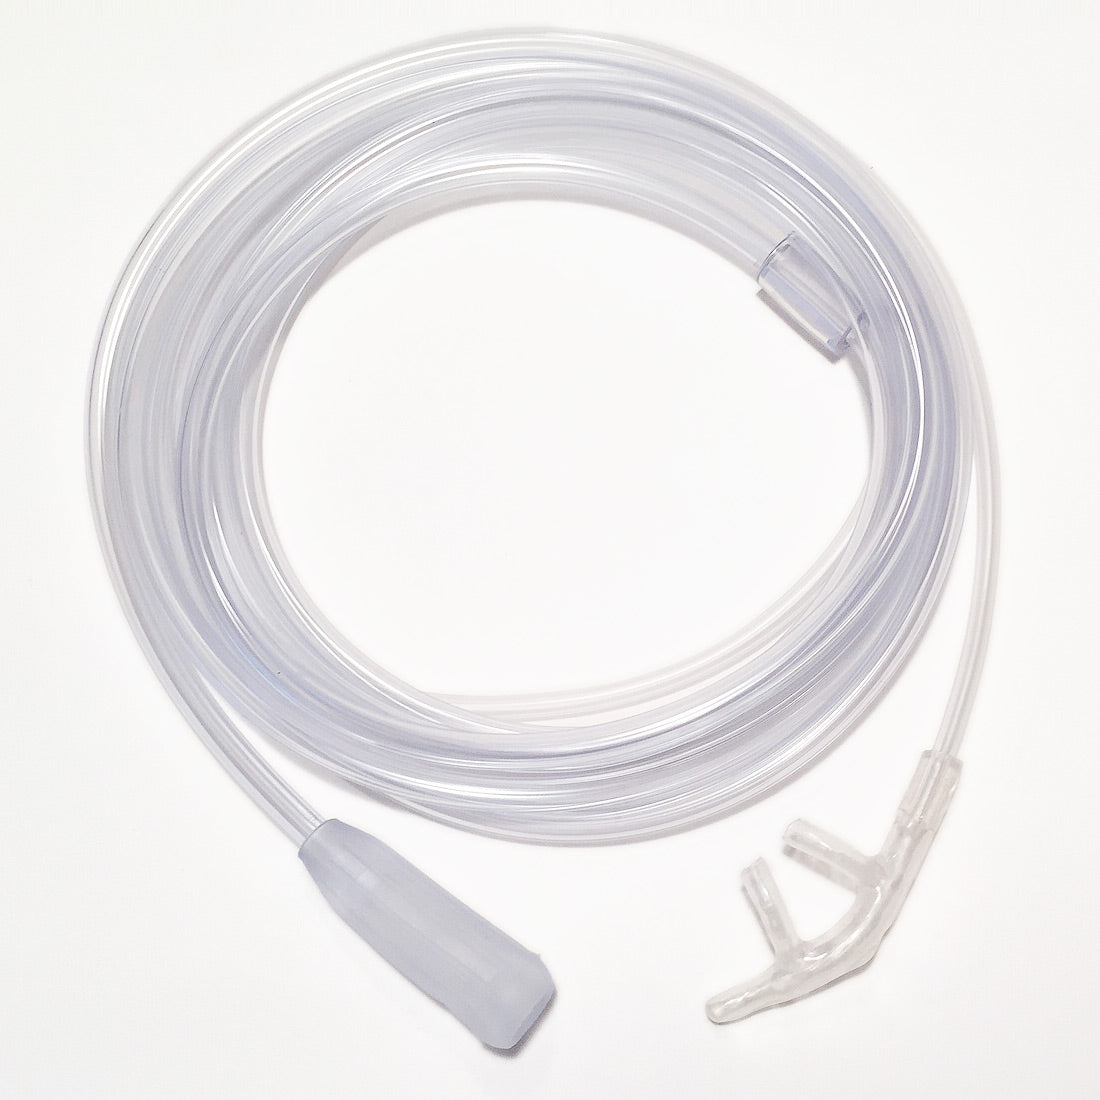 OxyBreather Single Sided Nasal Cannula with 7 Foot Oxygen Supply Tubing